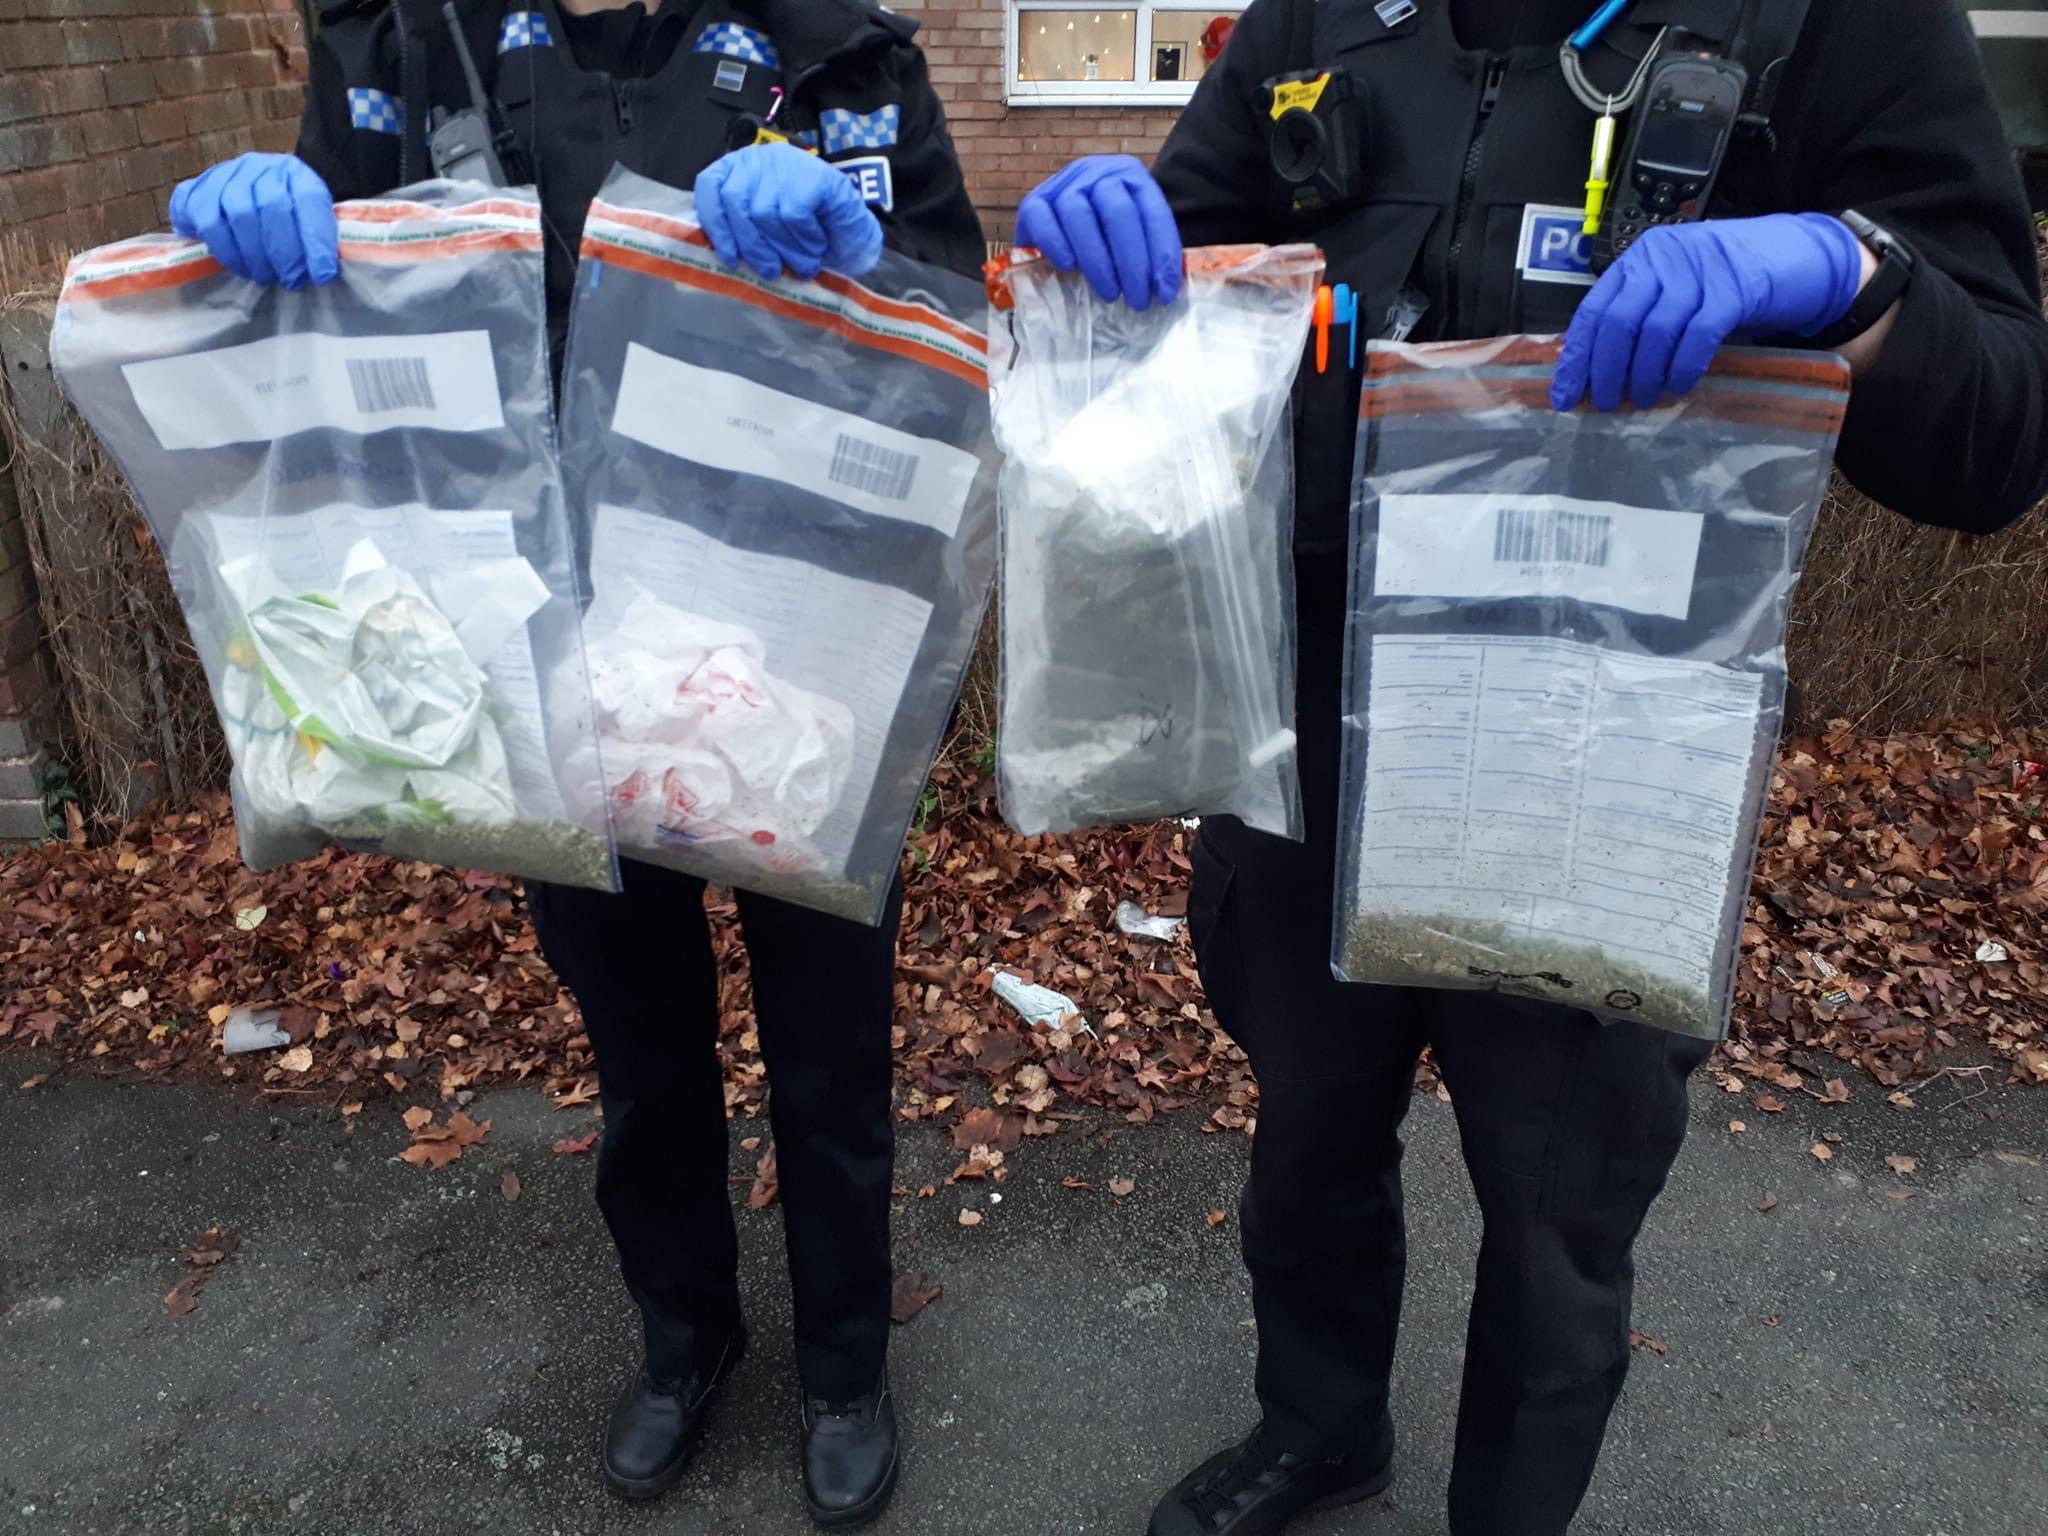 NEWS | One person arrested after drugs raid in Newton Farm area of Hereford